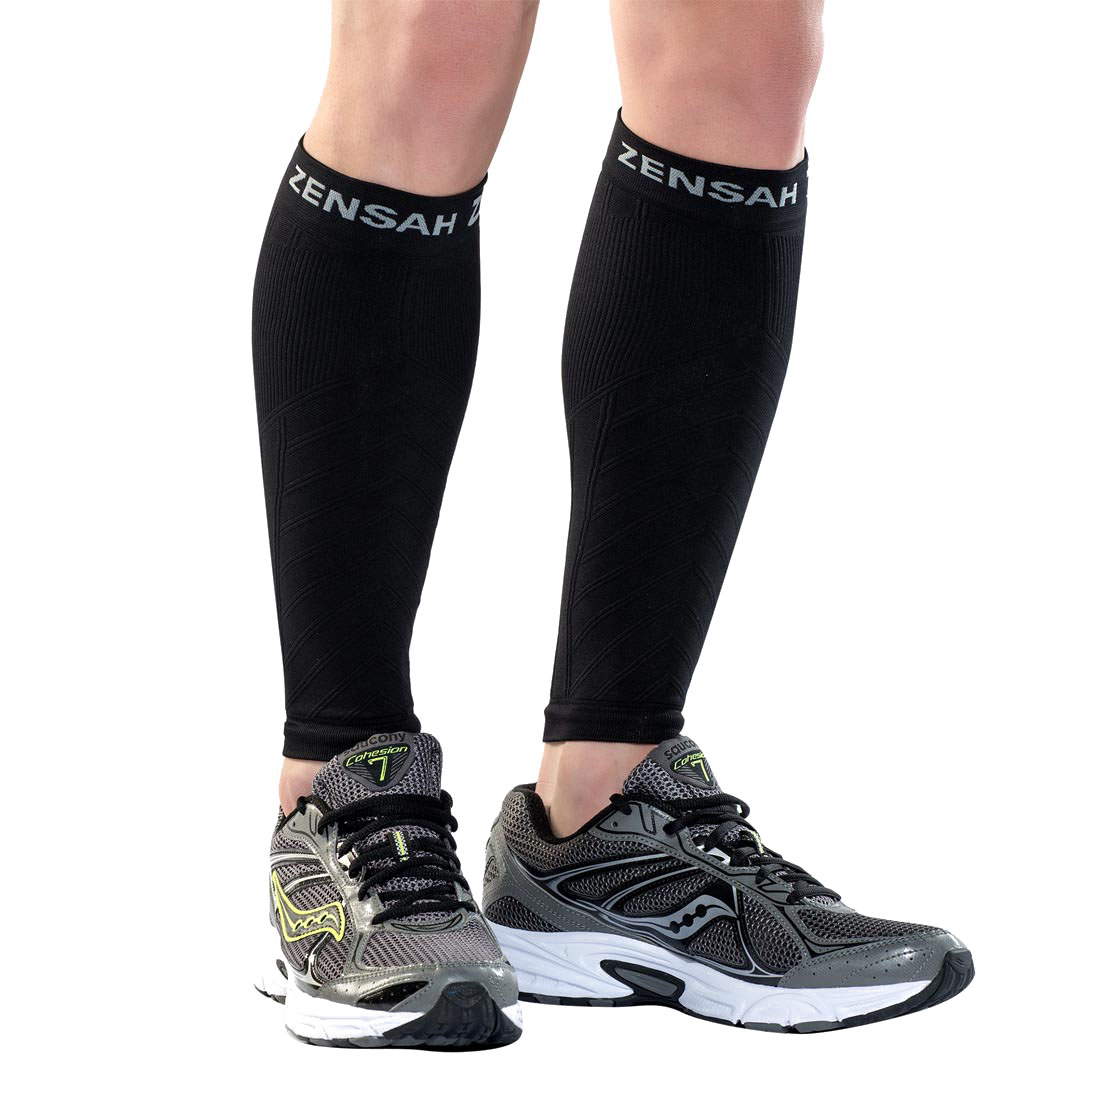 7 Reasons Why Calf Sleeves are for All Athletes